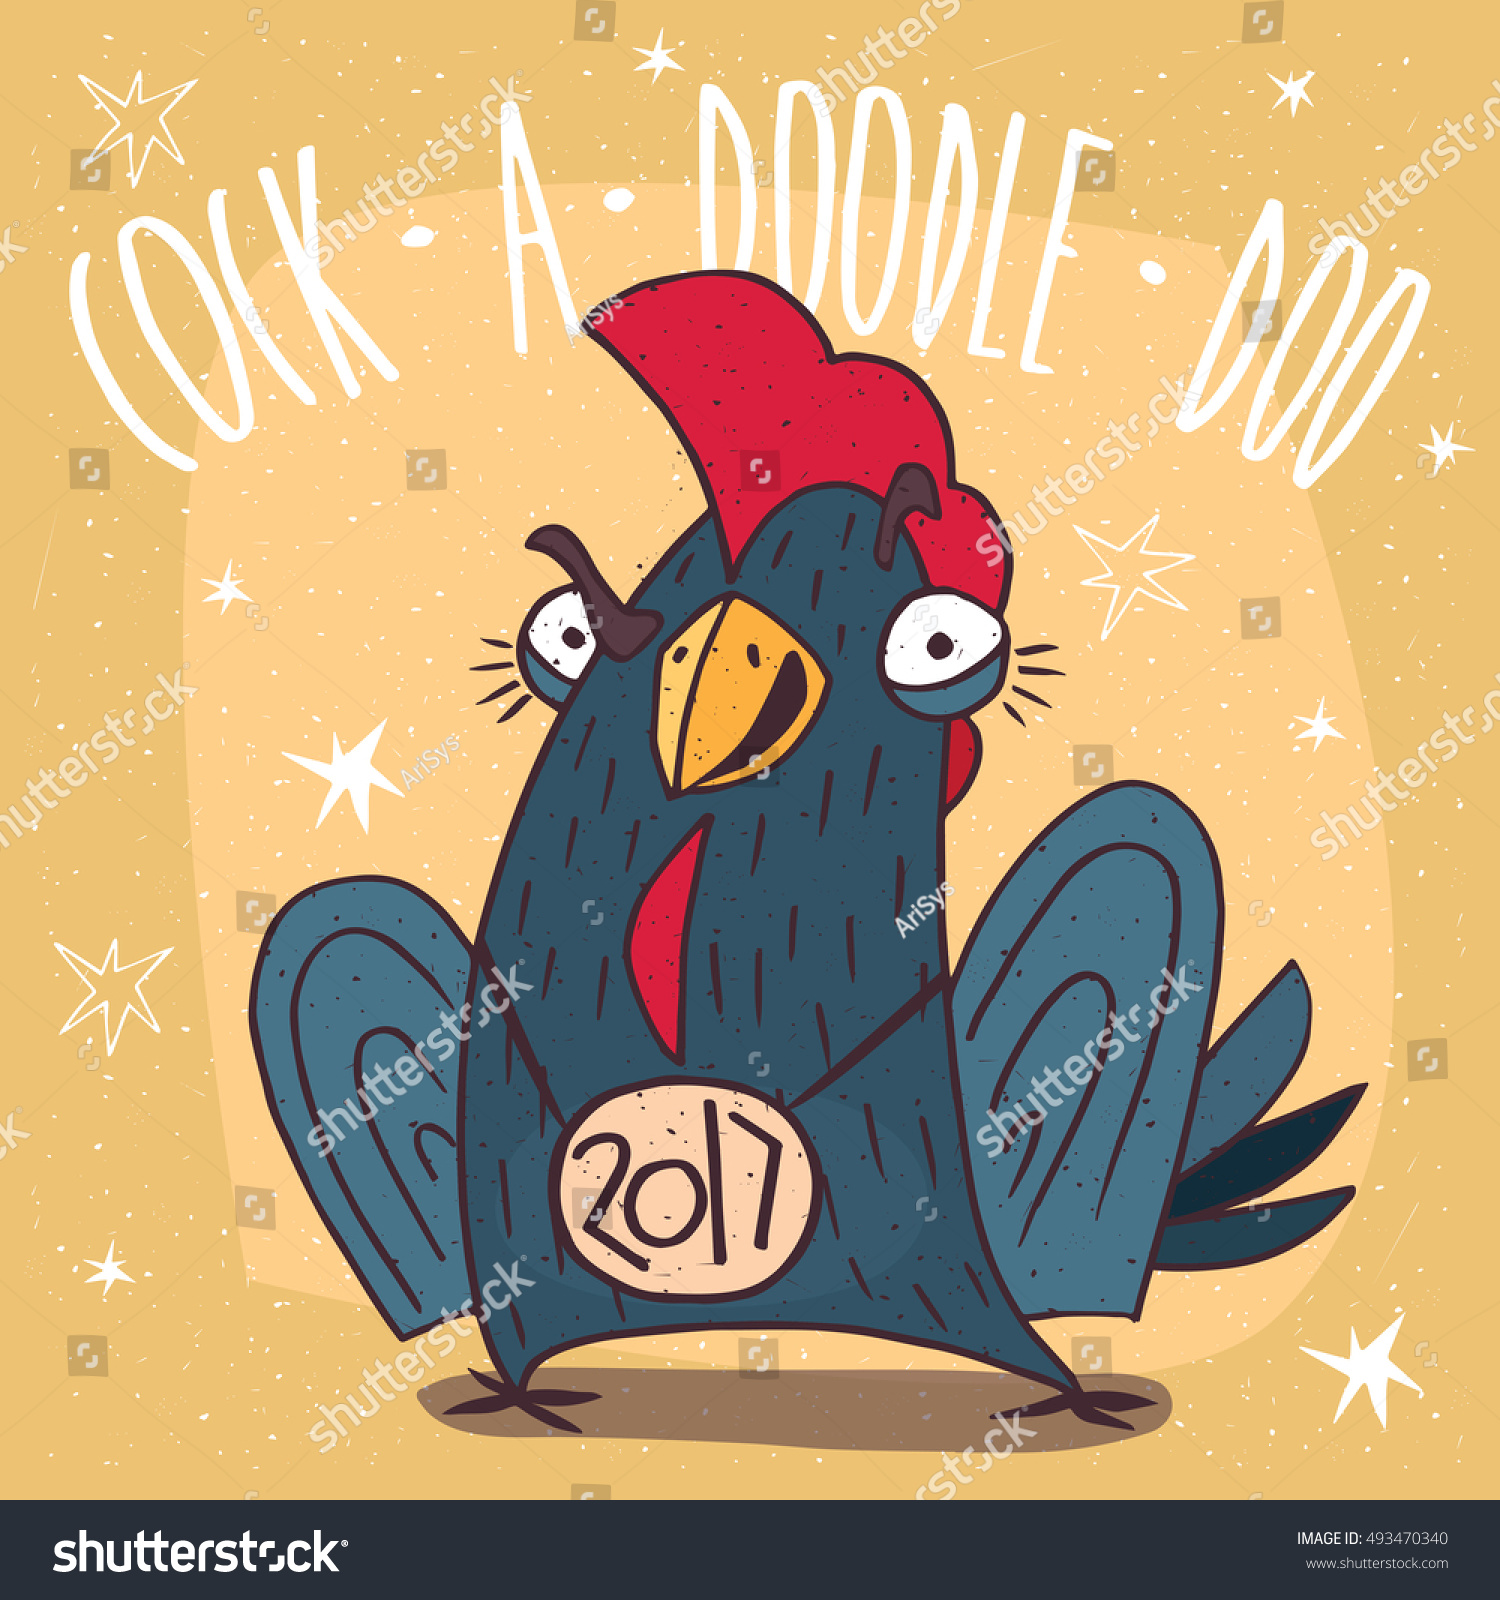 SVG of Cartoon self-confident and aggressively tuned cock or rooster with the logo 2017, stands and smiles on yellow background. Cock a doodle doo lettering. Vector illustration svg